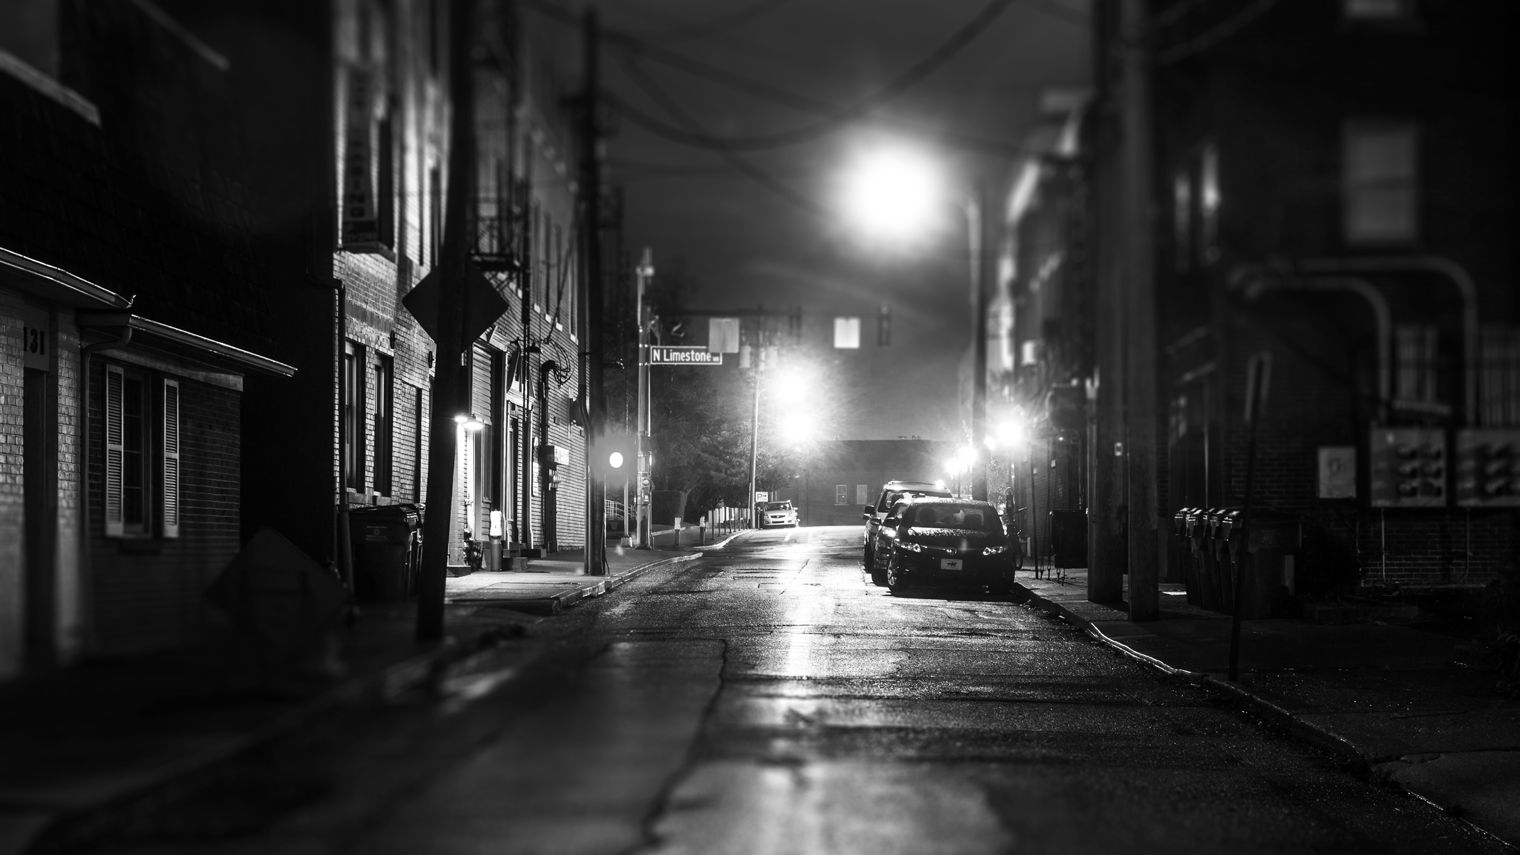 A suburban, nighttime vista: a dark stretch of road in town, lined by brick buildings and lit intermittently by street lamps, wet from the rain.